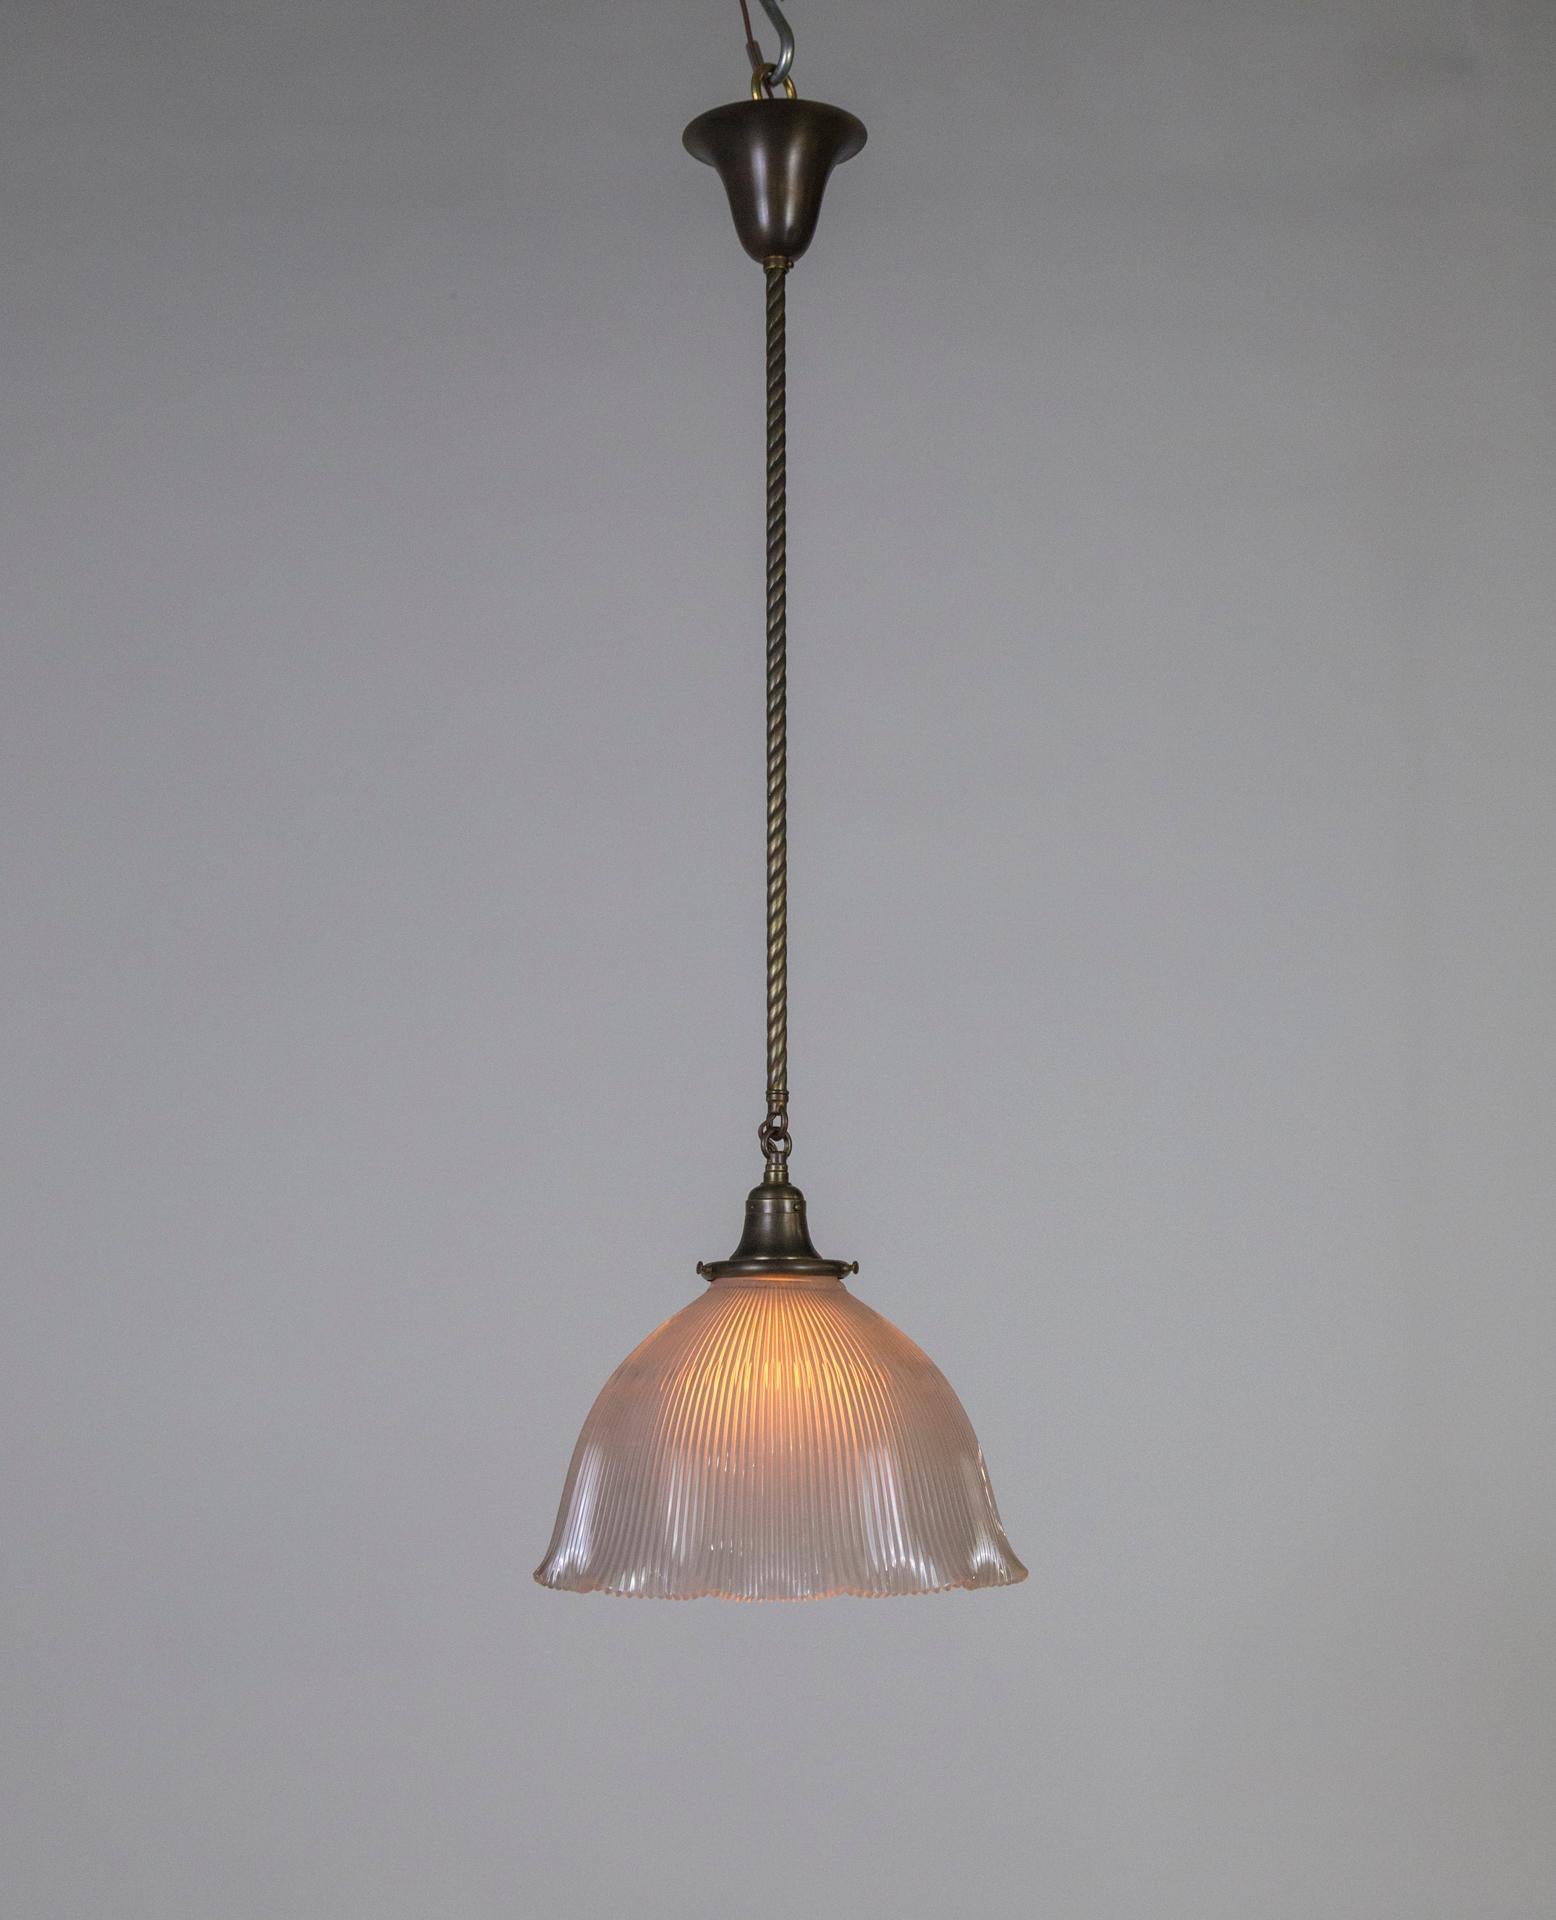 A pendant light with an antique (c. 1910), bell flower shaped, holophane glass shade with an elegant, ruffled bottom; with a switch at the socket, hung with antiqued tone brass rope stem. Paired with matching shade holder and canopy. Newly made and